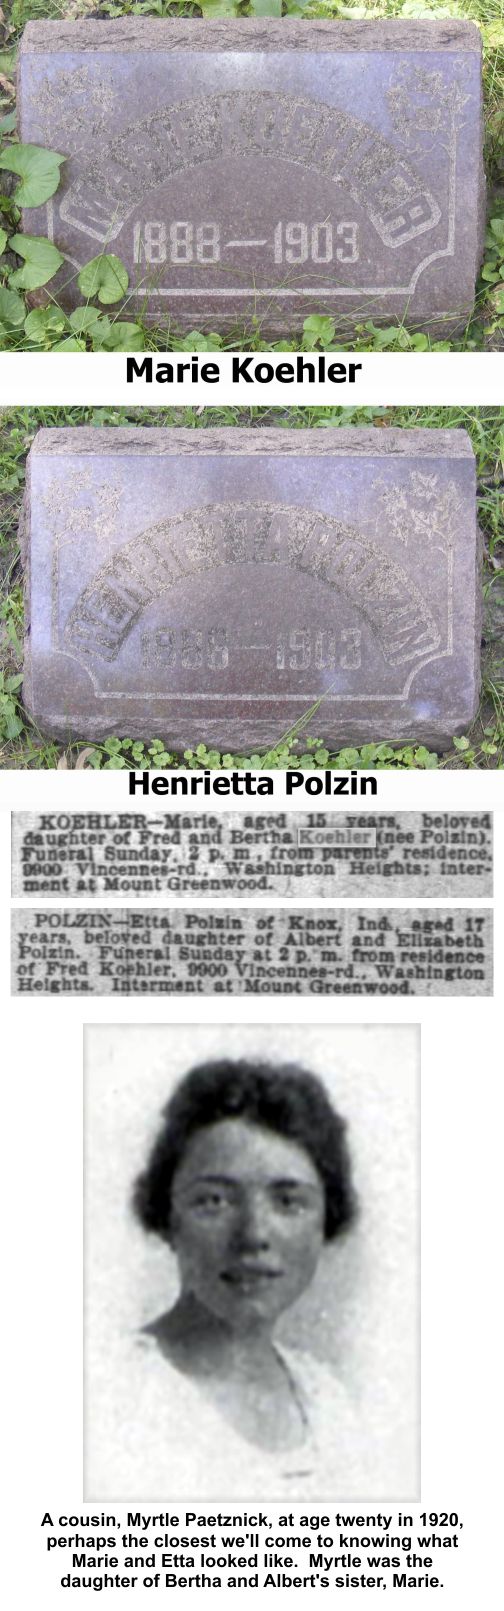 Polzin and Koehler cousins died while their mothers survived